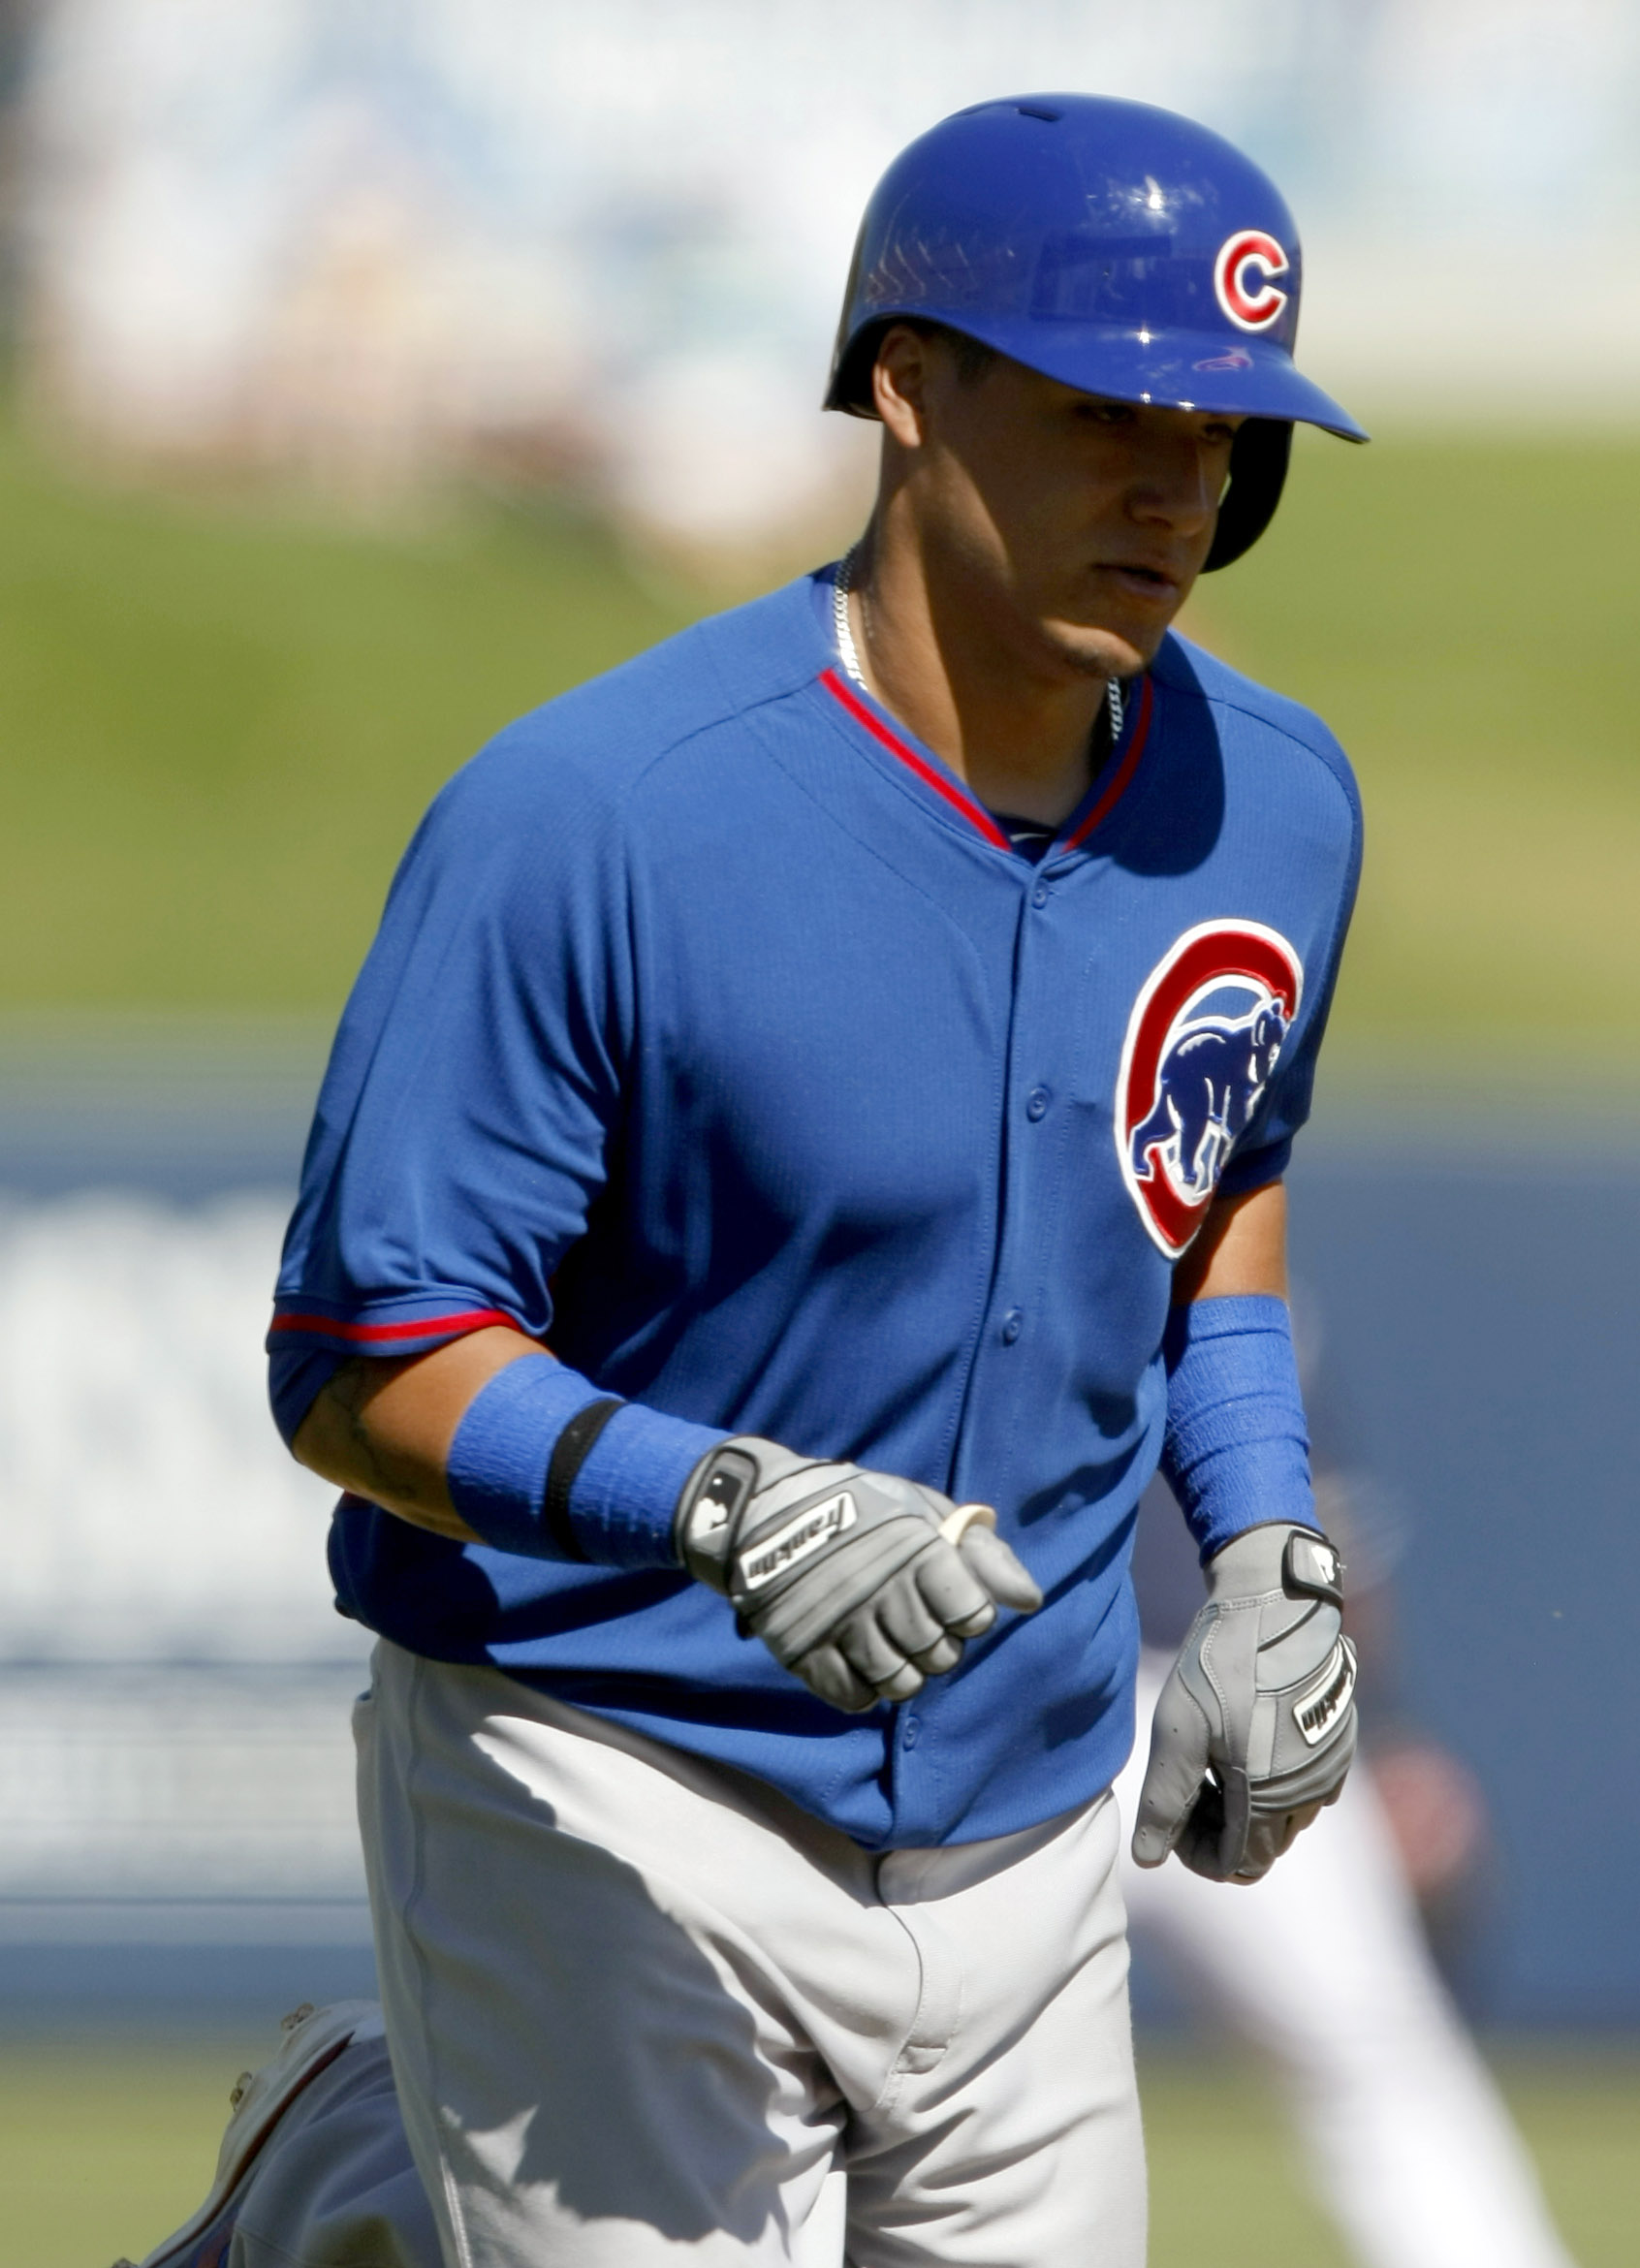 Javier Baez has dream debut with Mets following trade from Cubs 